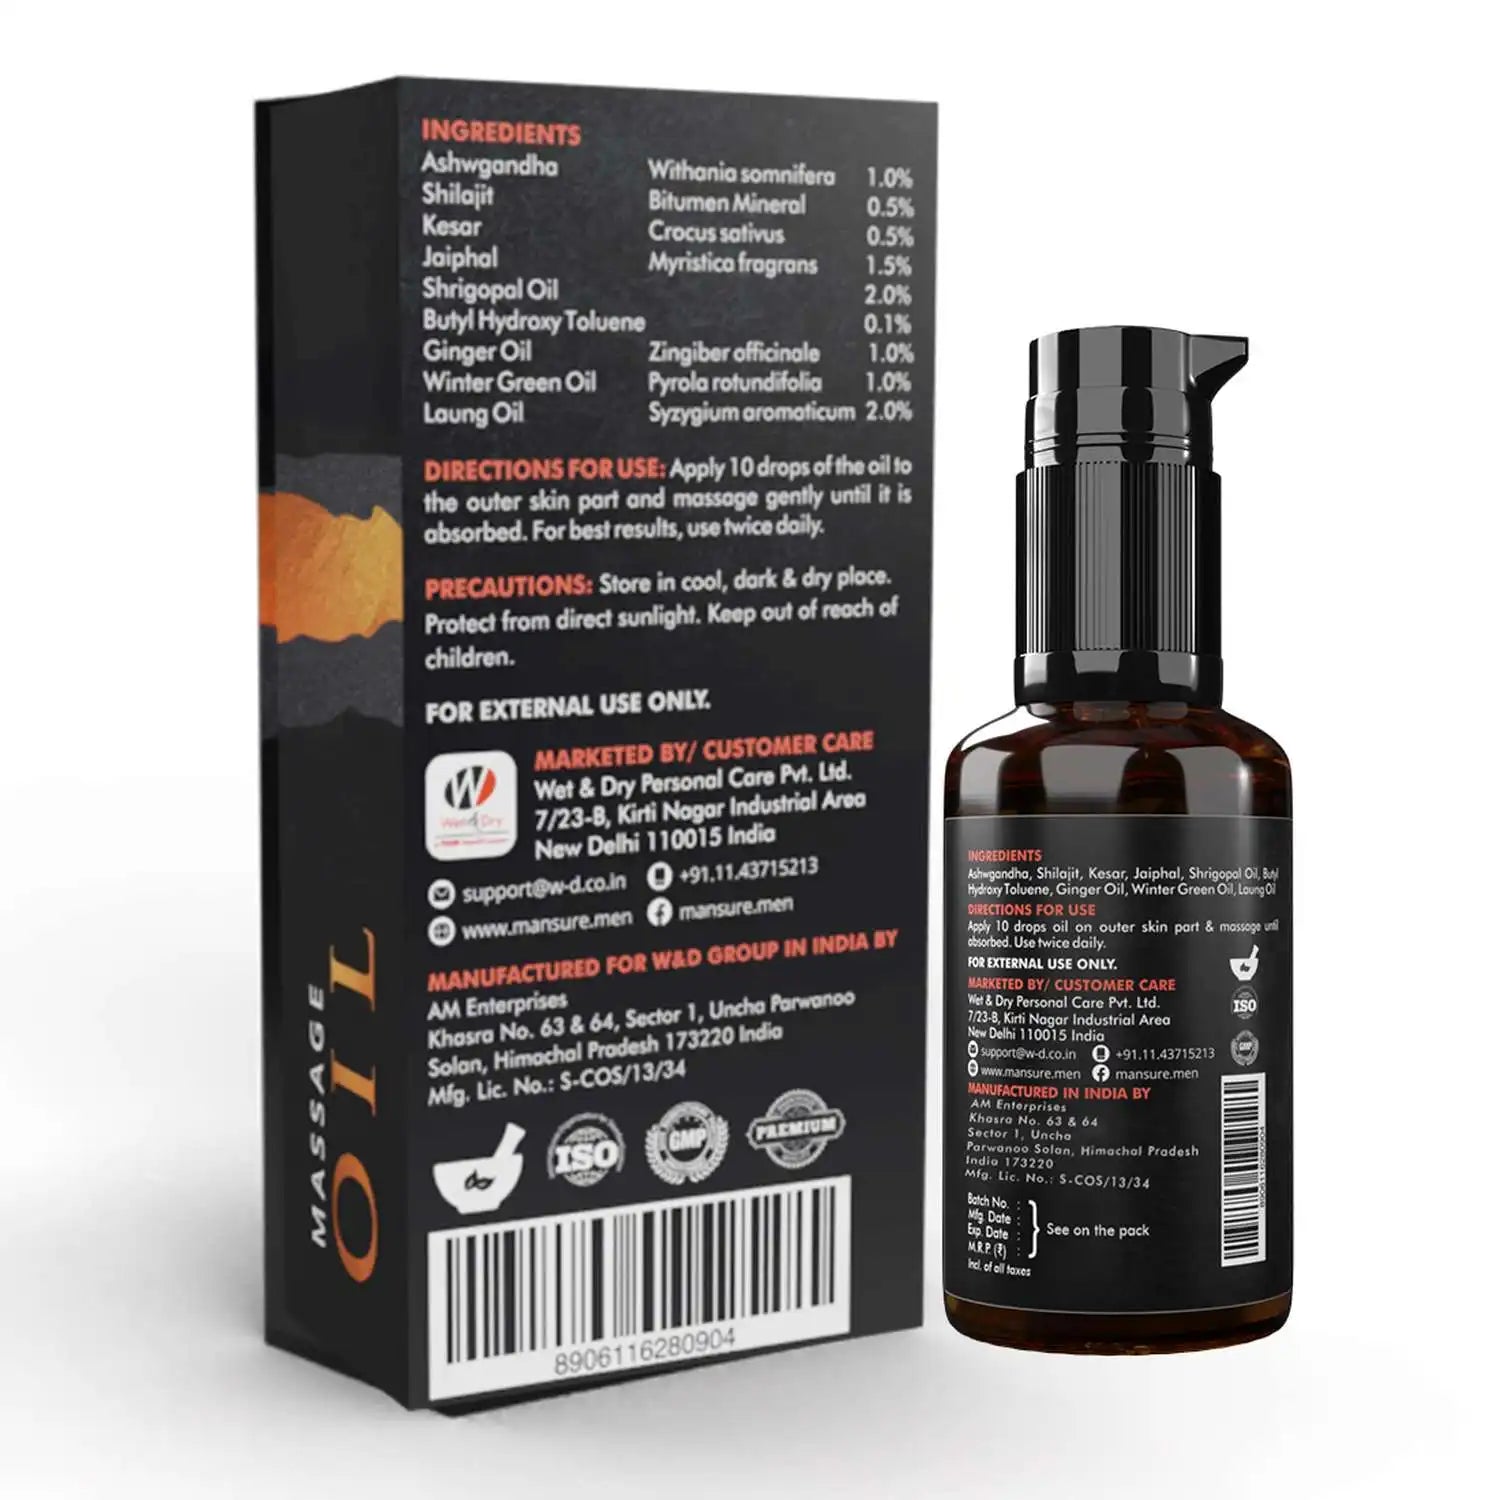 Follow directions on pack while using ManSure Massage Oil for Men